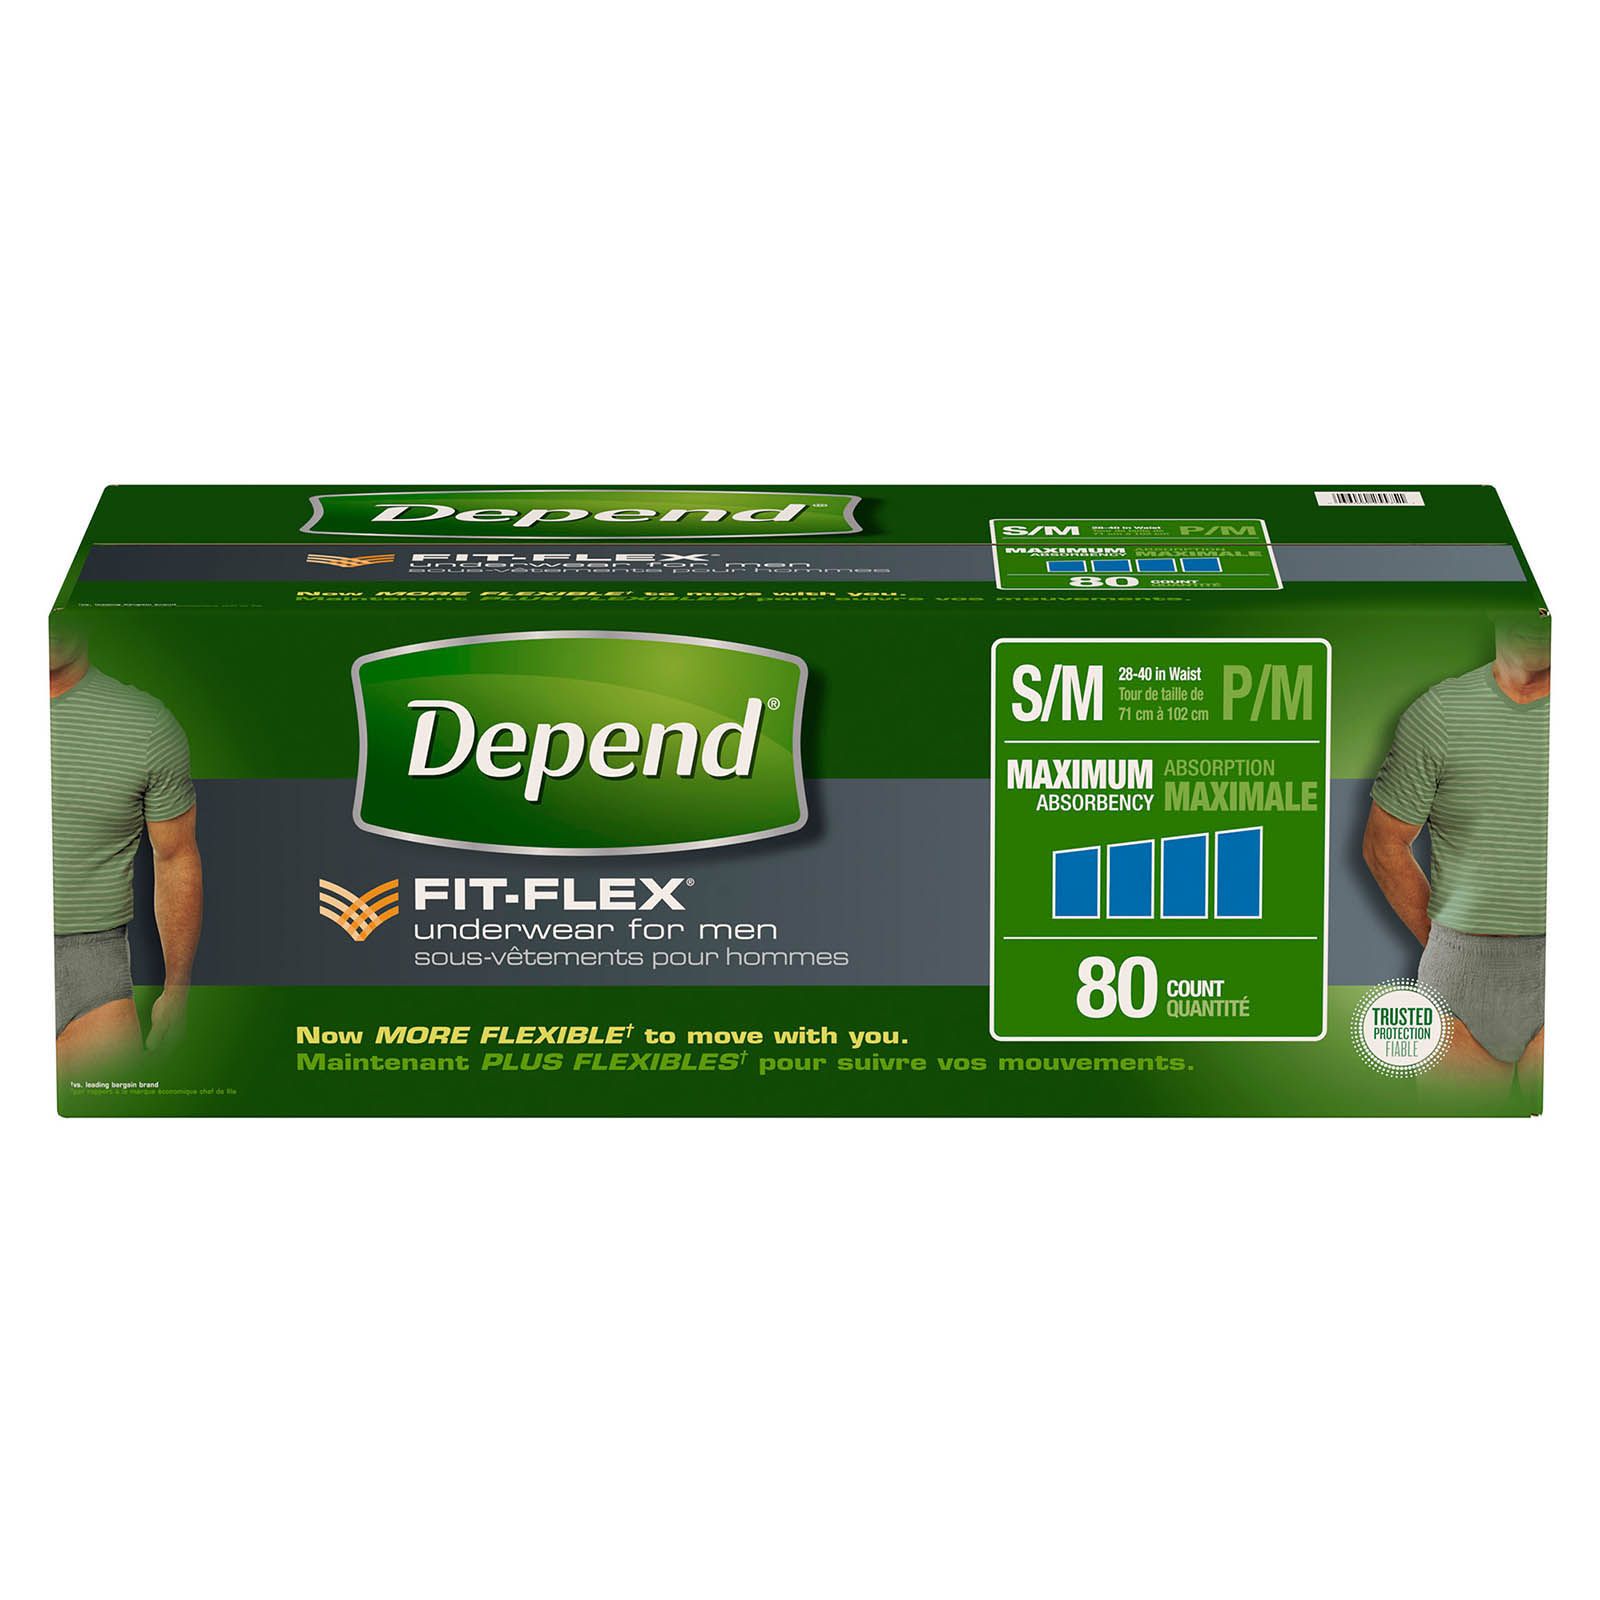 Depend FIT-FLEX Incontinence Underwear for Men with Maximum Absorbency ...